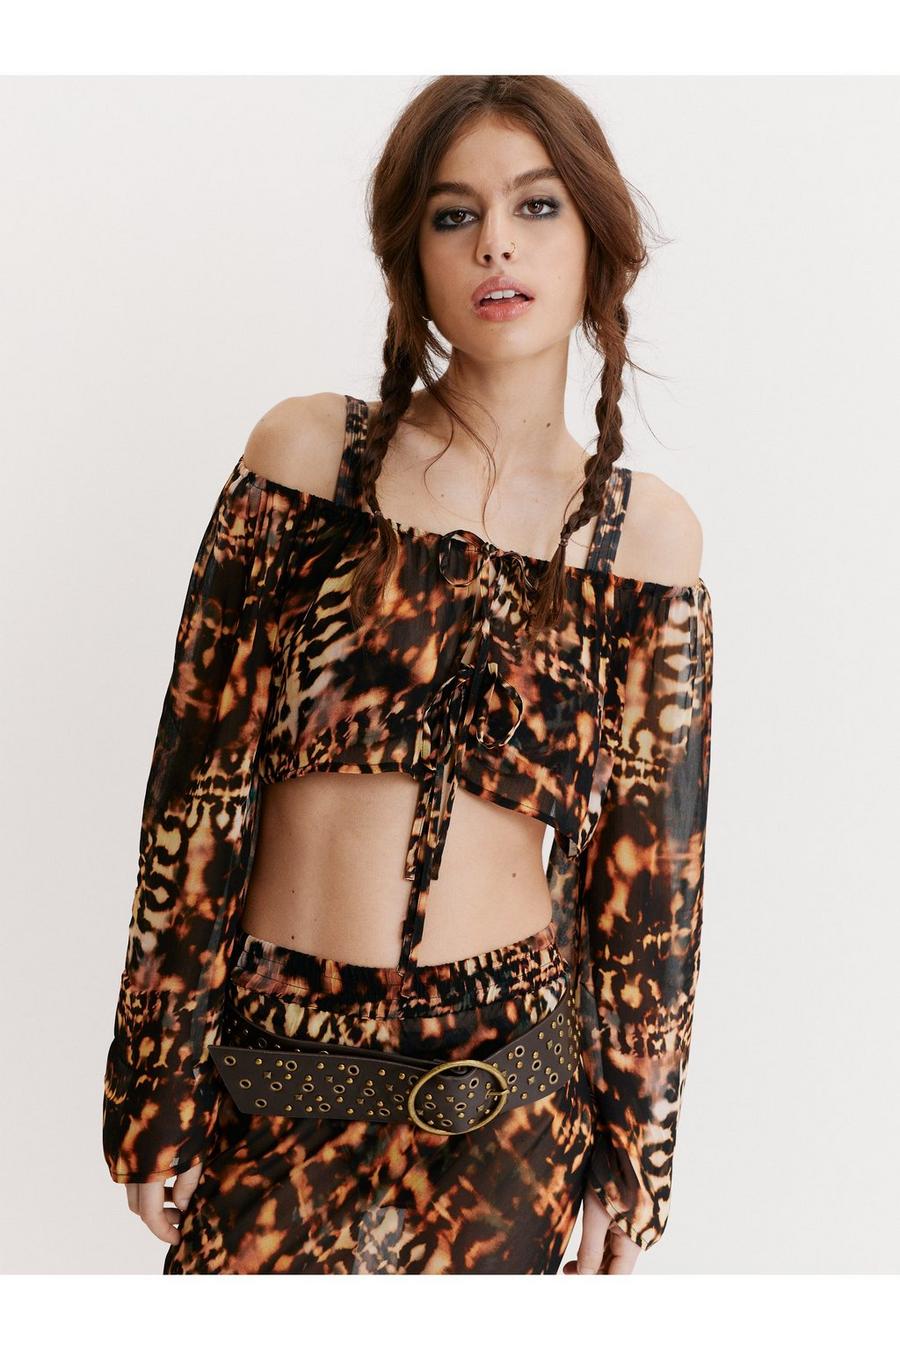 Brown Sheer Animal Print Tie Front Beach Cover Up Top